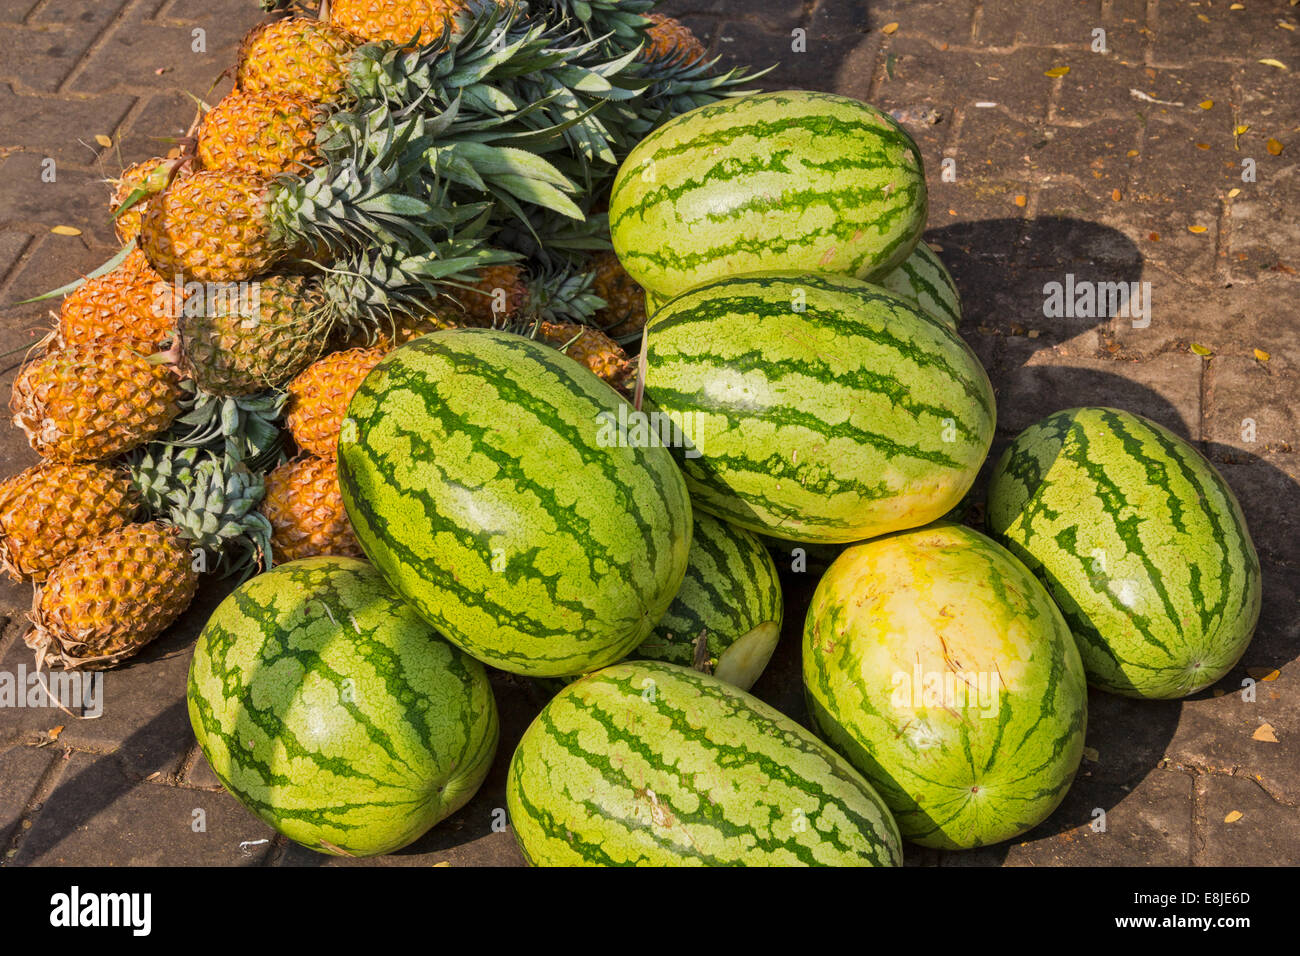 MELONS AND PINEAPPLES FOR SALE ON A PAVEMENT IN INDIA Stock Photo